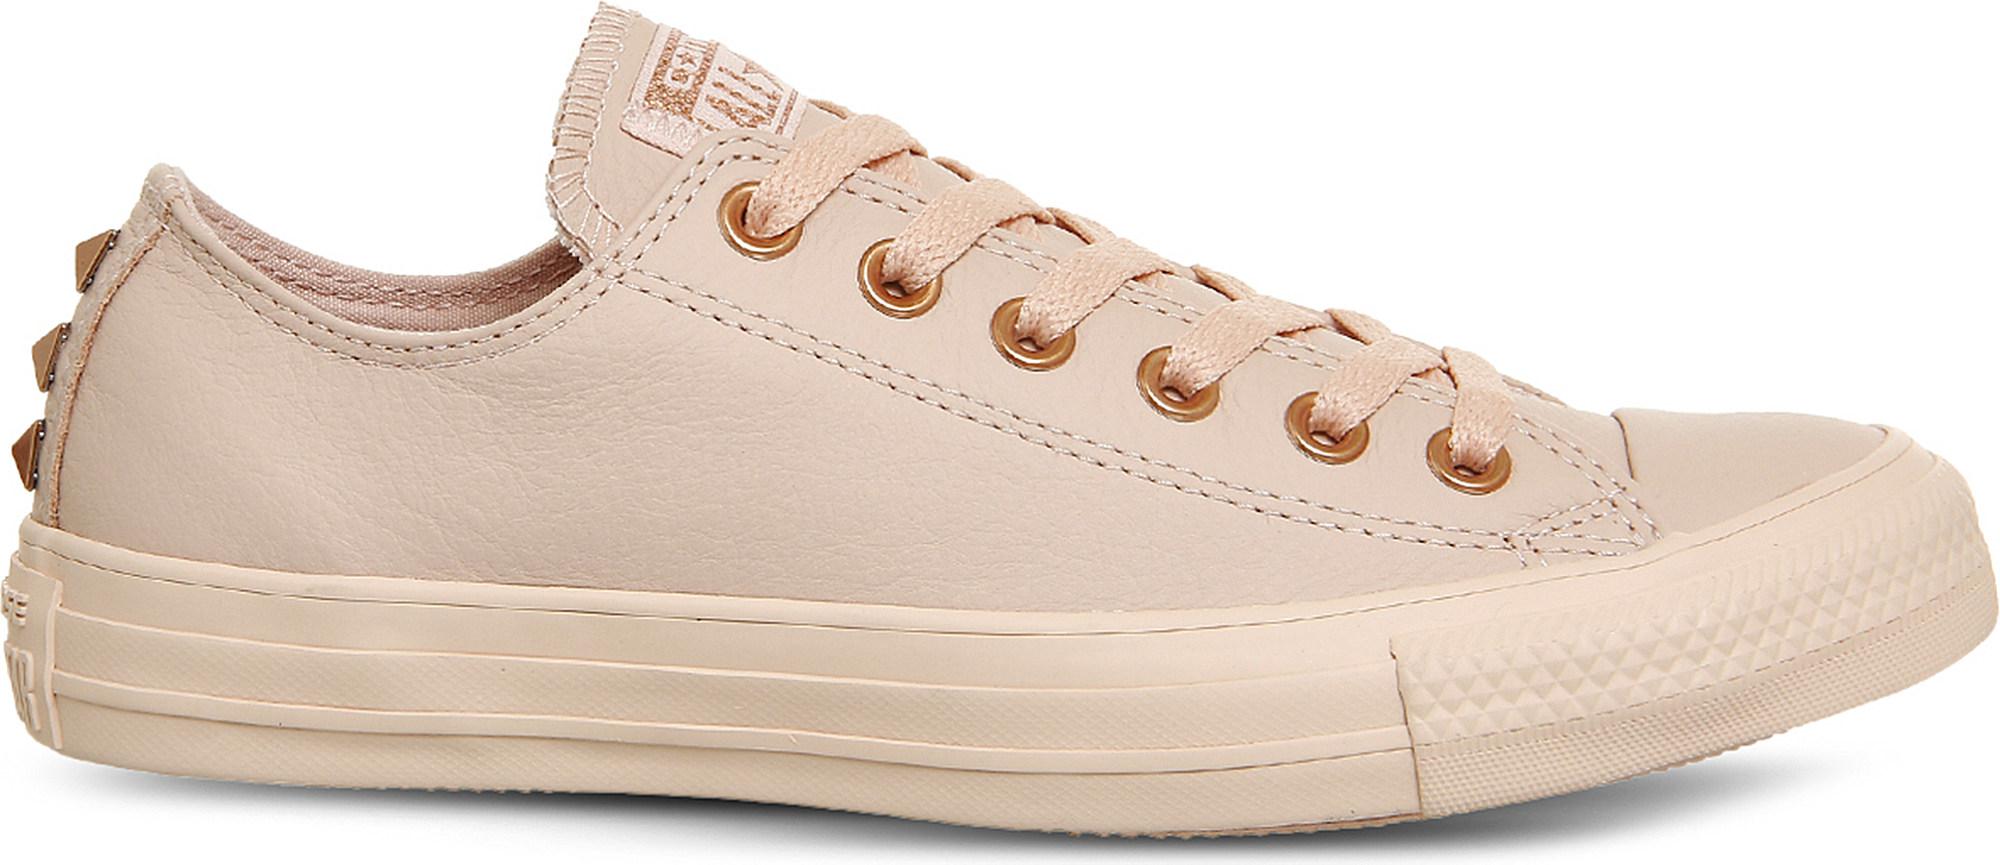 Converse All Star Low-top Studded Leather Trainers in Pink - Lyst